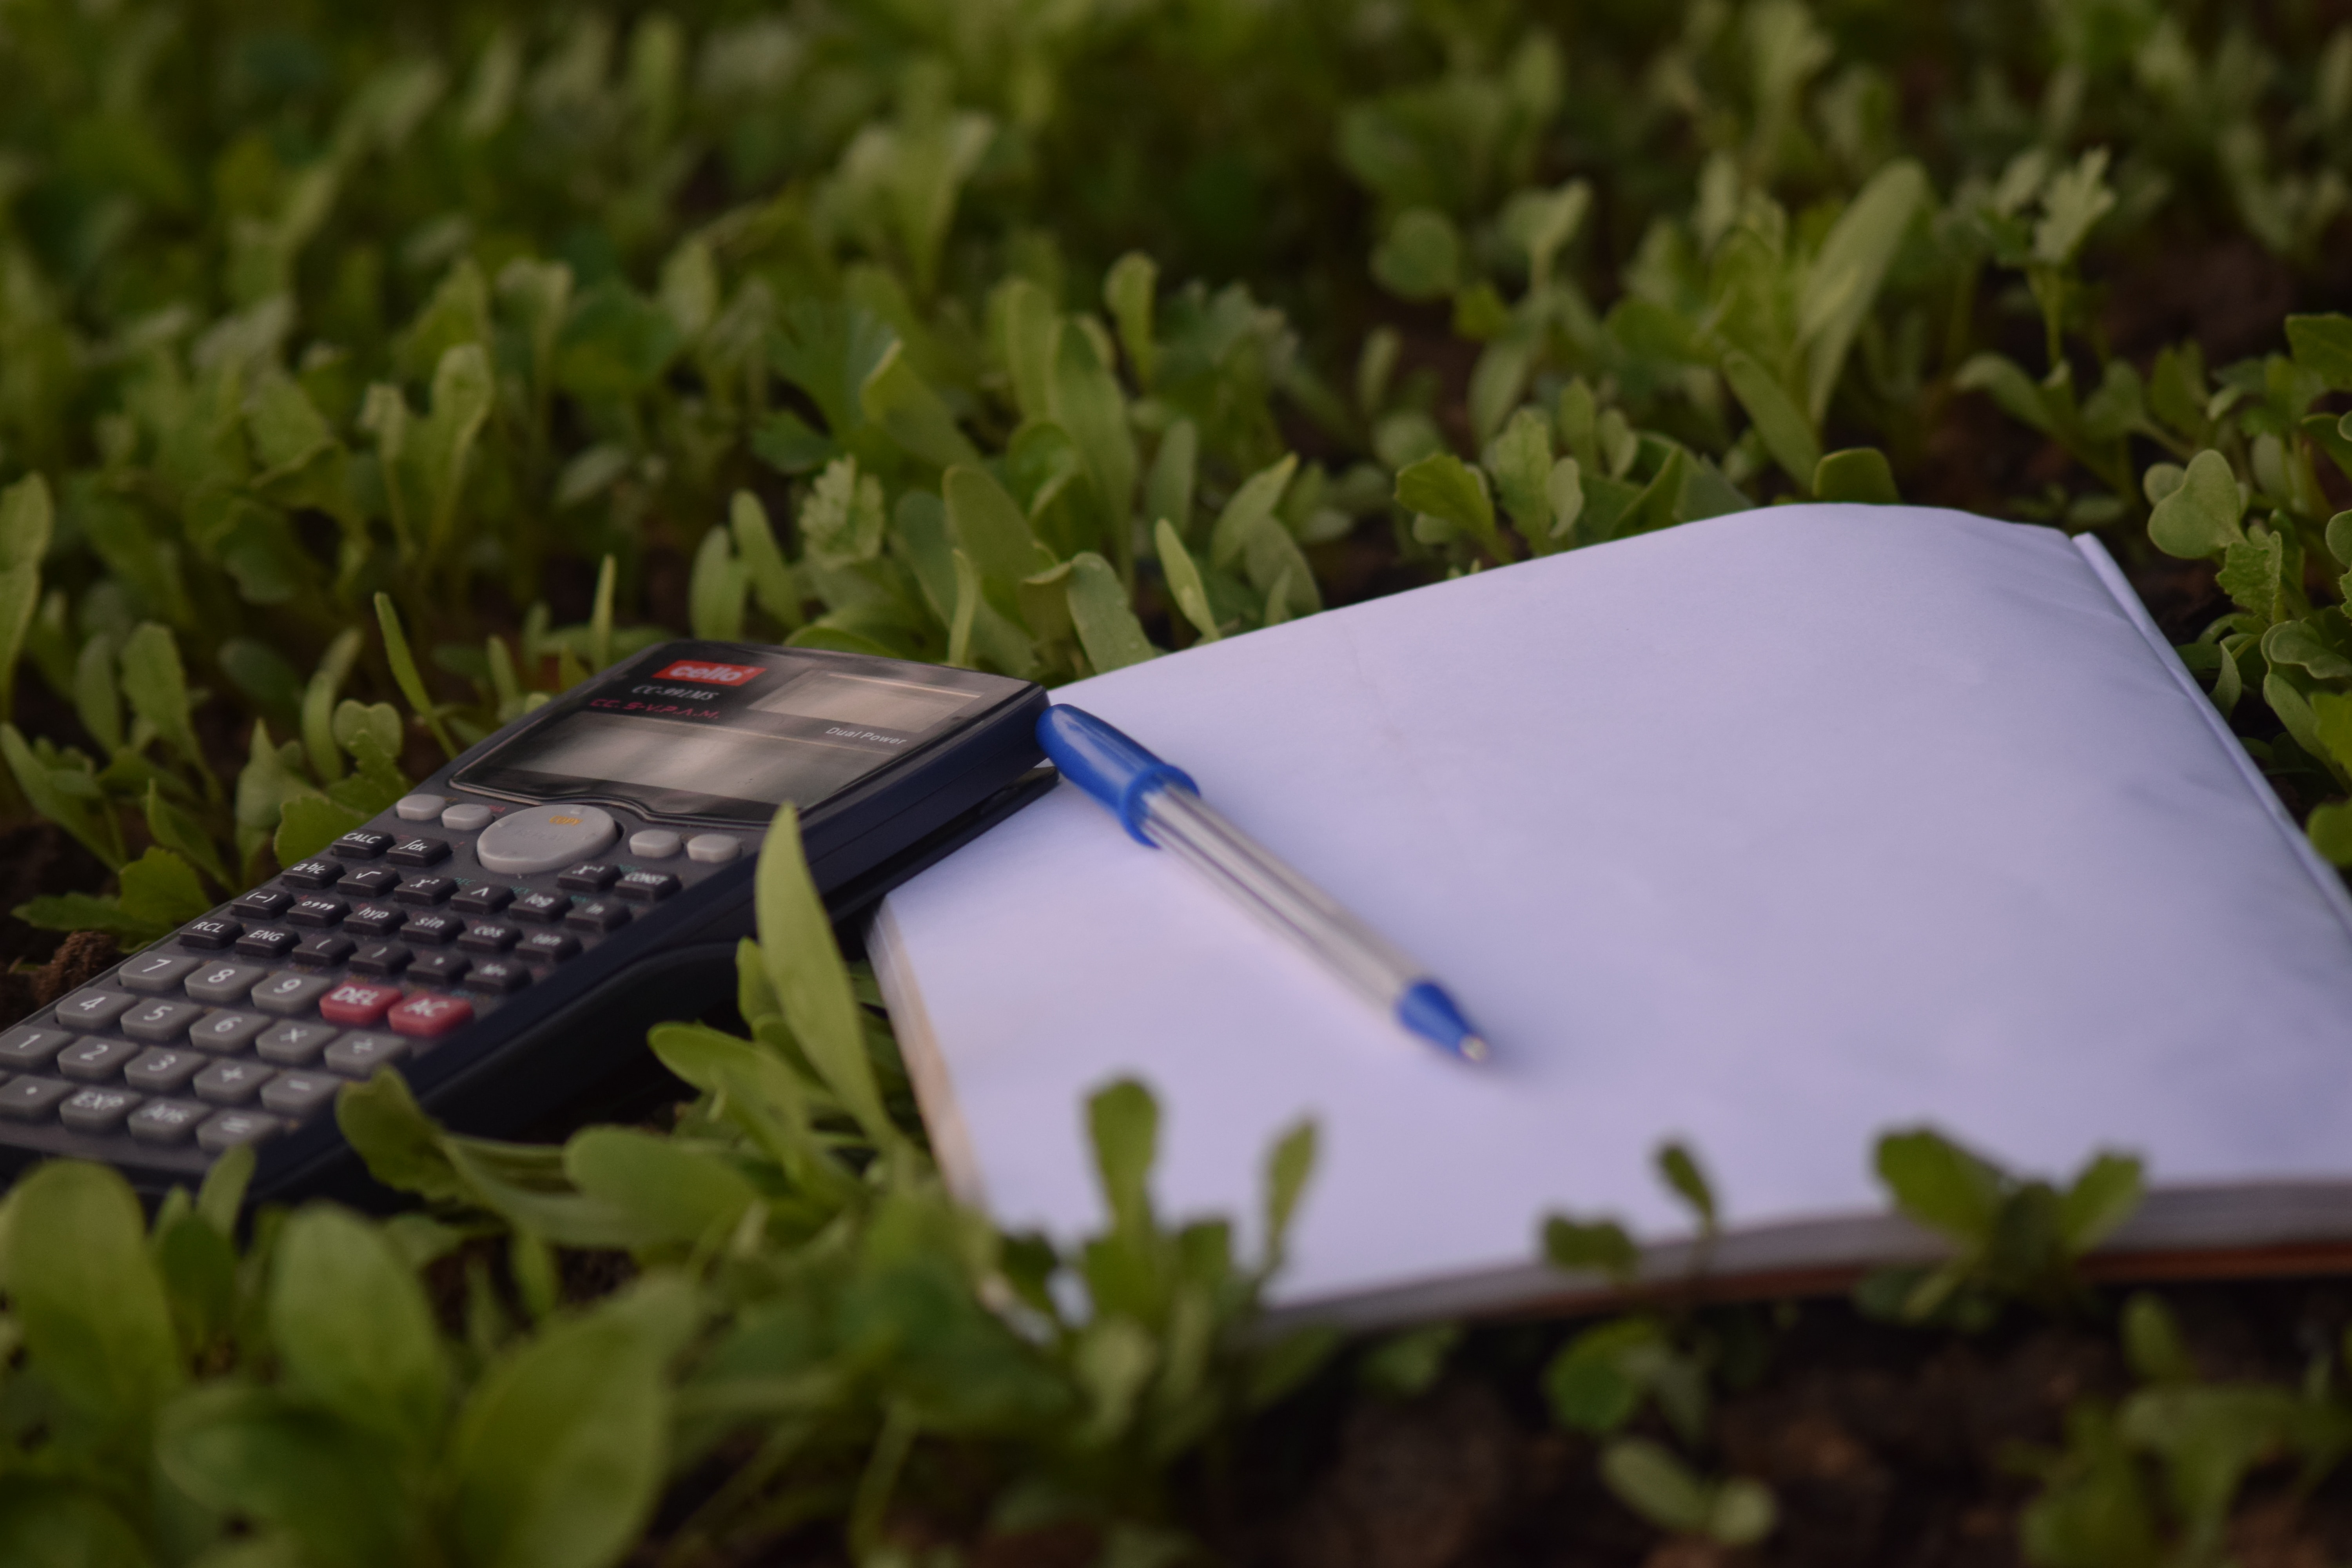 A blank pad, pen and calculator in a field